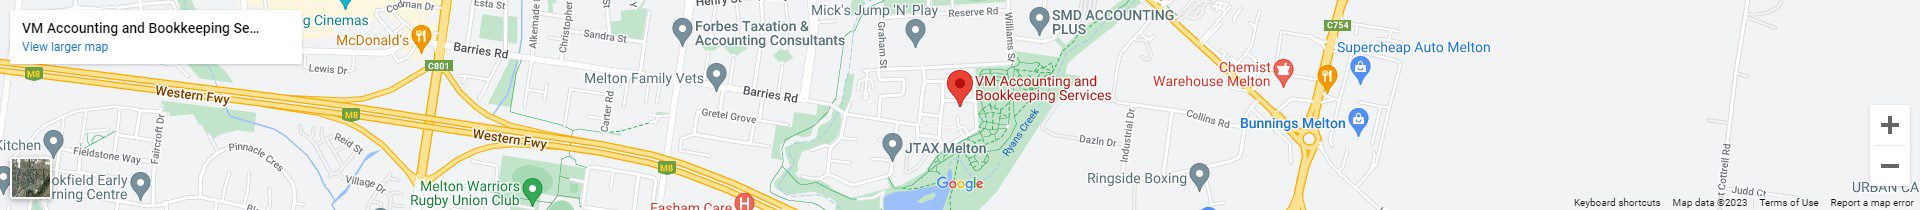 VM Accounting and Bookkeeping Services